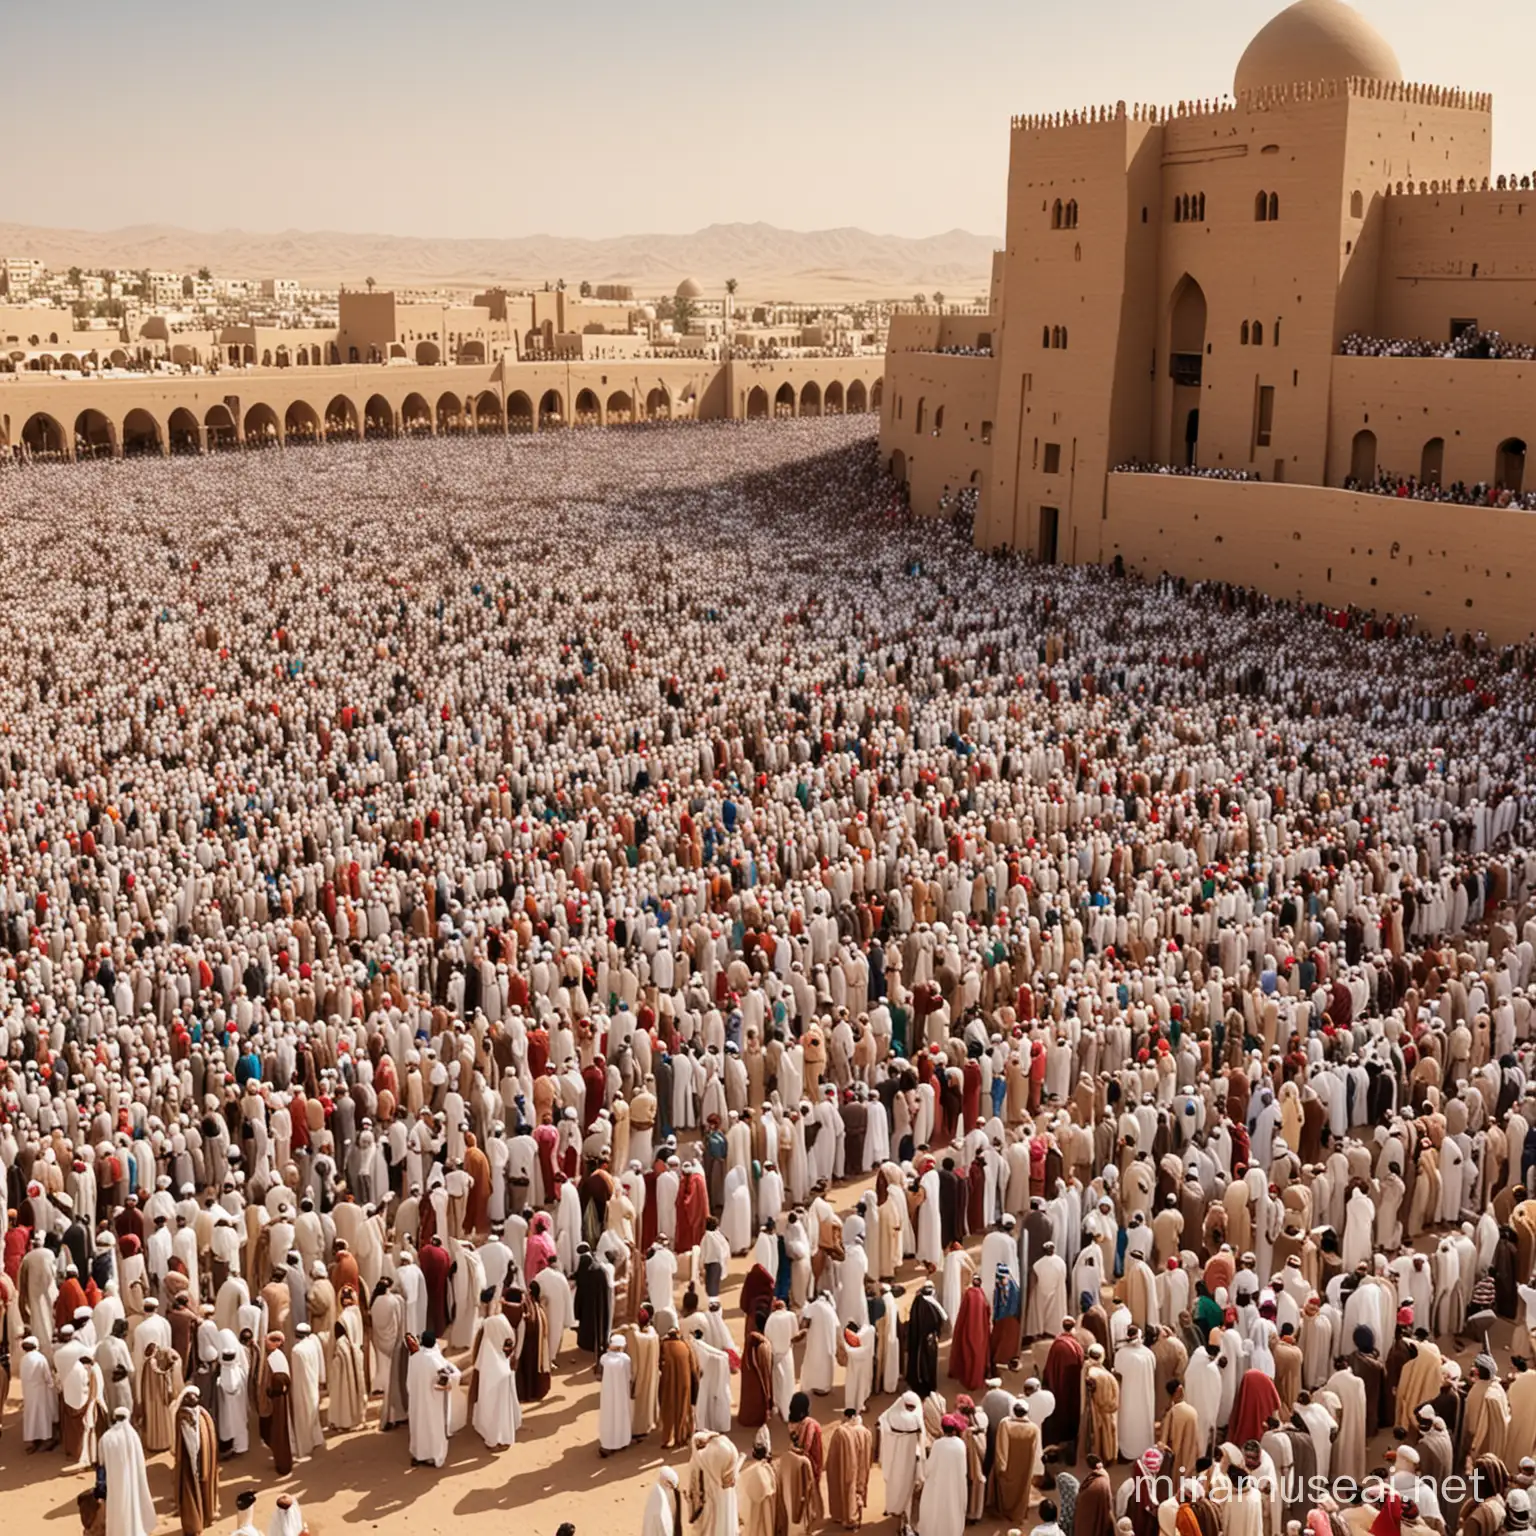 Arabian Announces Important News to Crowded Plaza in 600AD